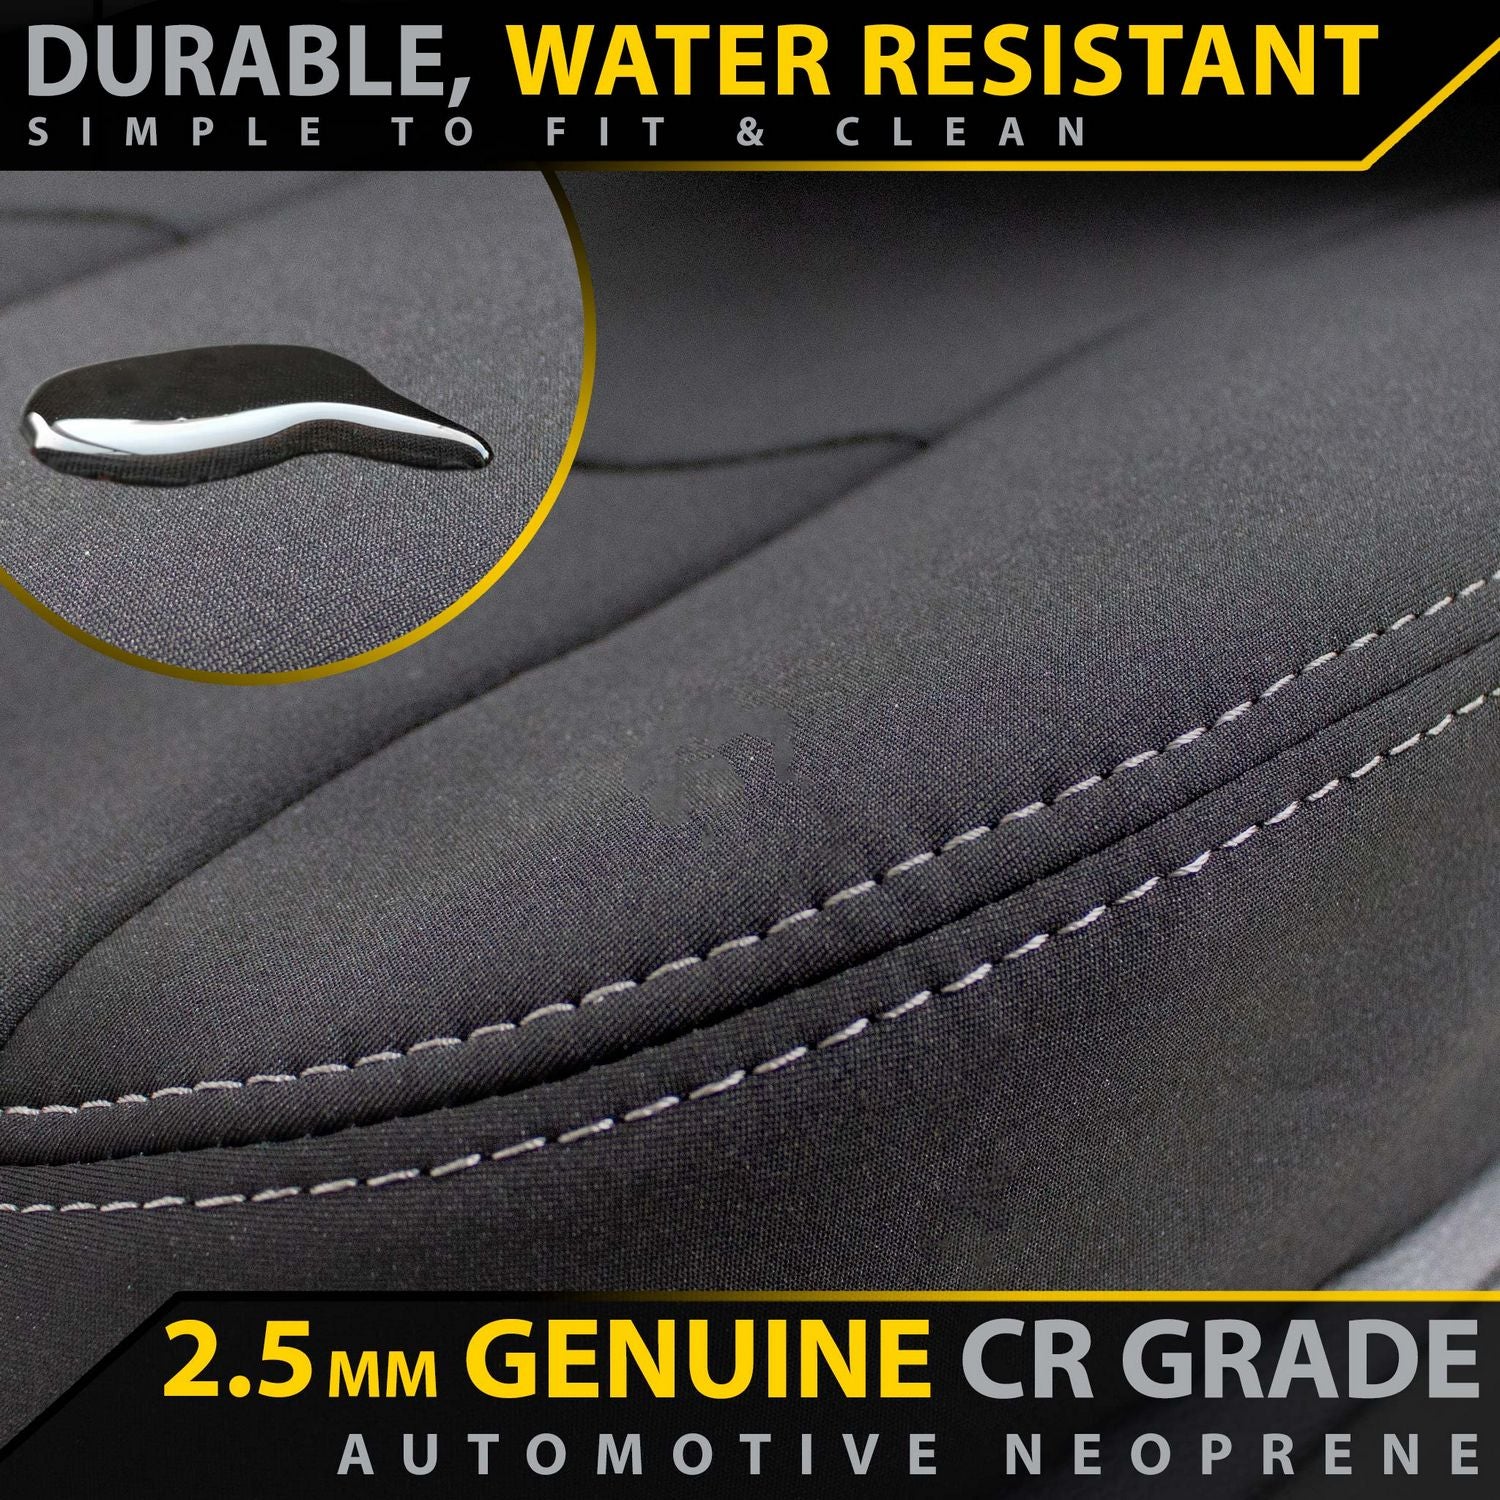 Isuzu D-MAX RG Single Cab Neoprene 2x Front Seat Covers (Made to Order)